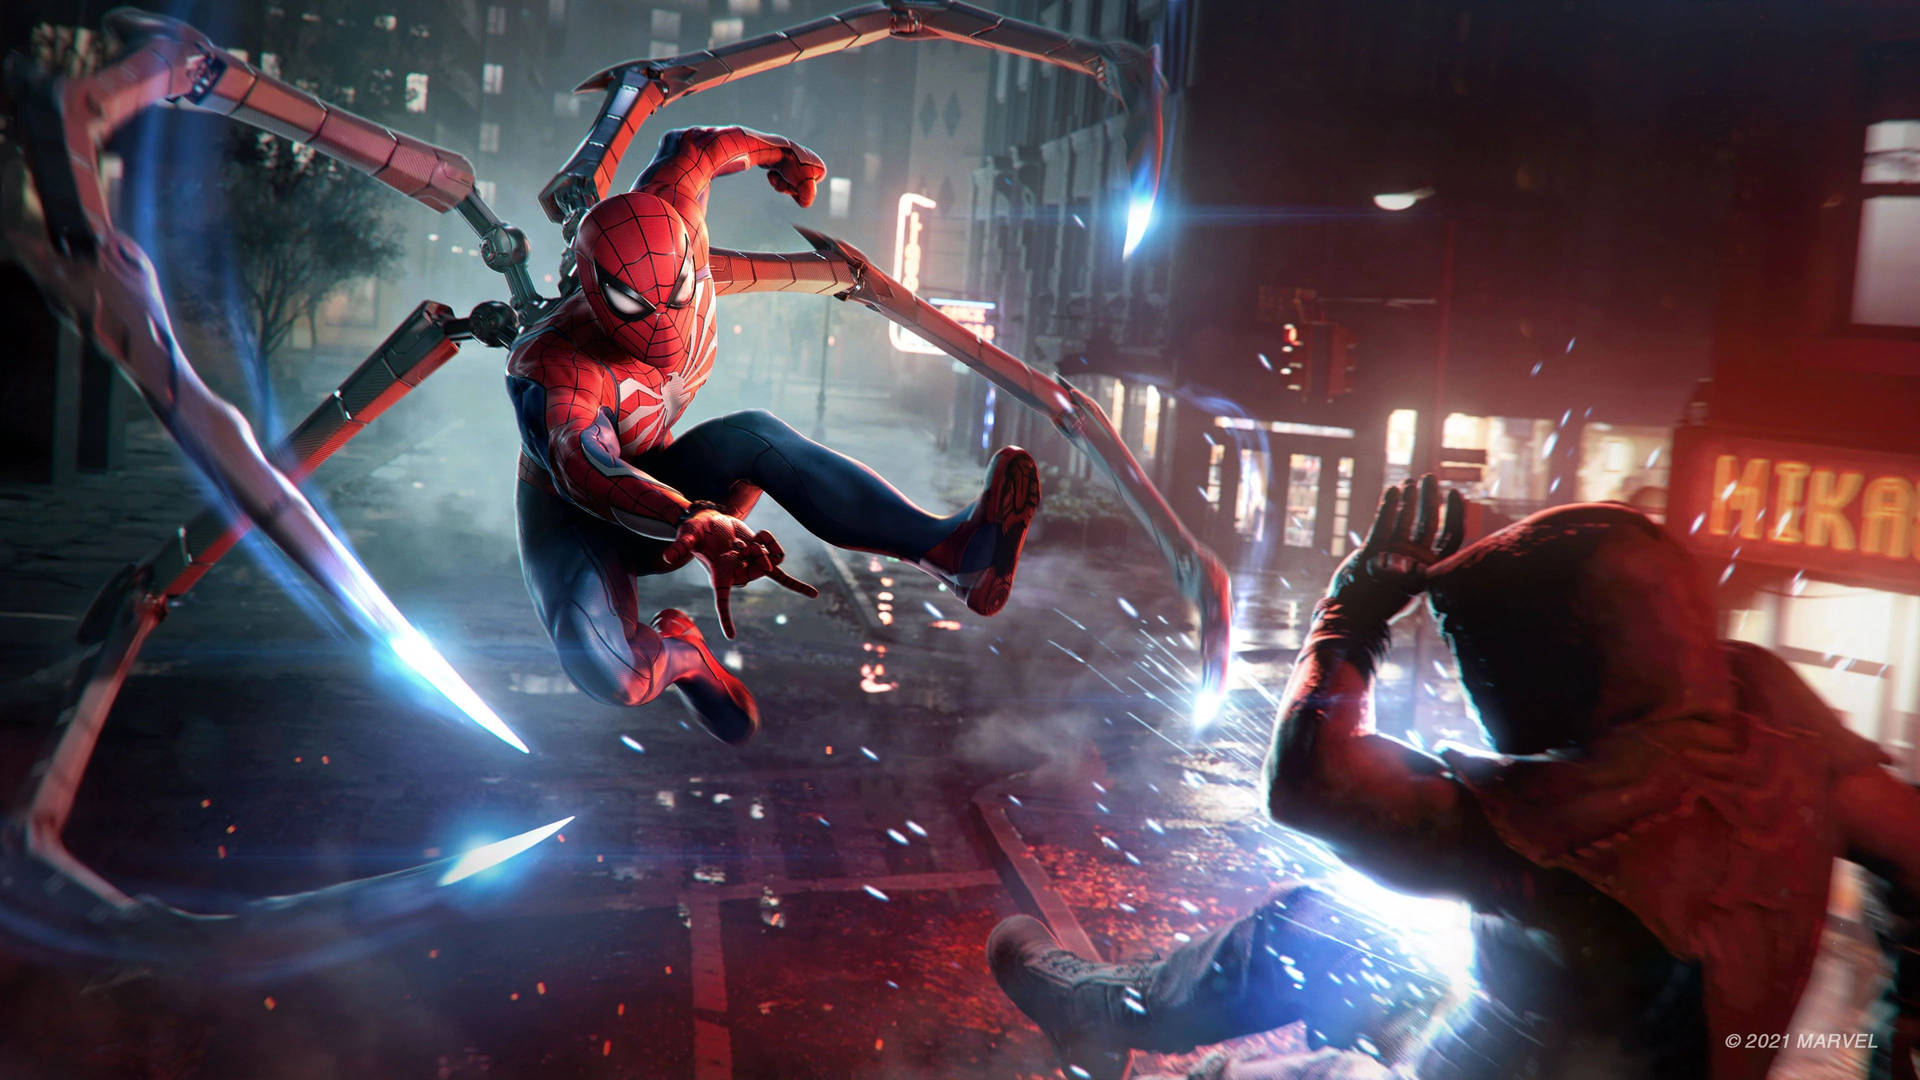 Get lost in the immersive world of Marvel and Xbox Wallpaper